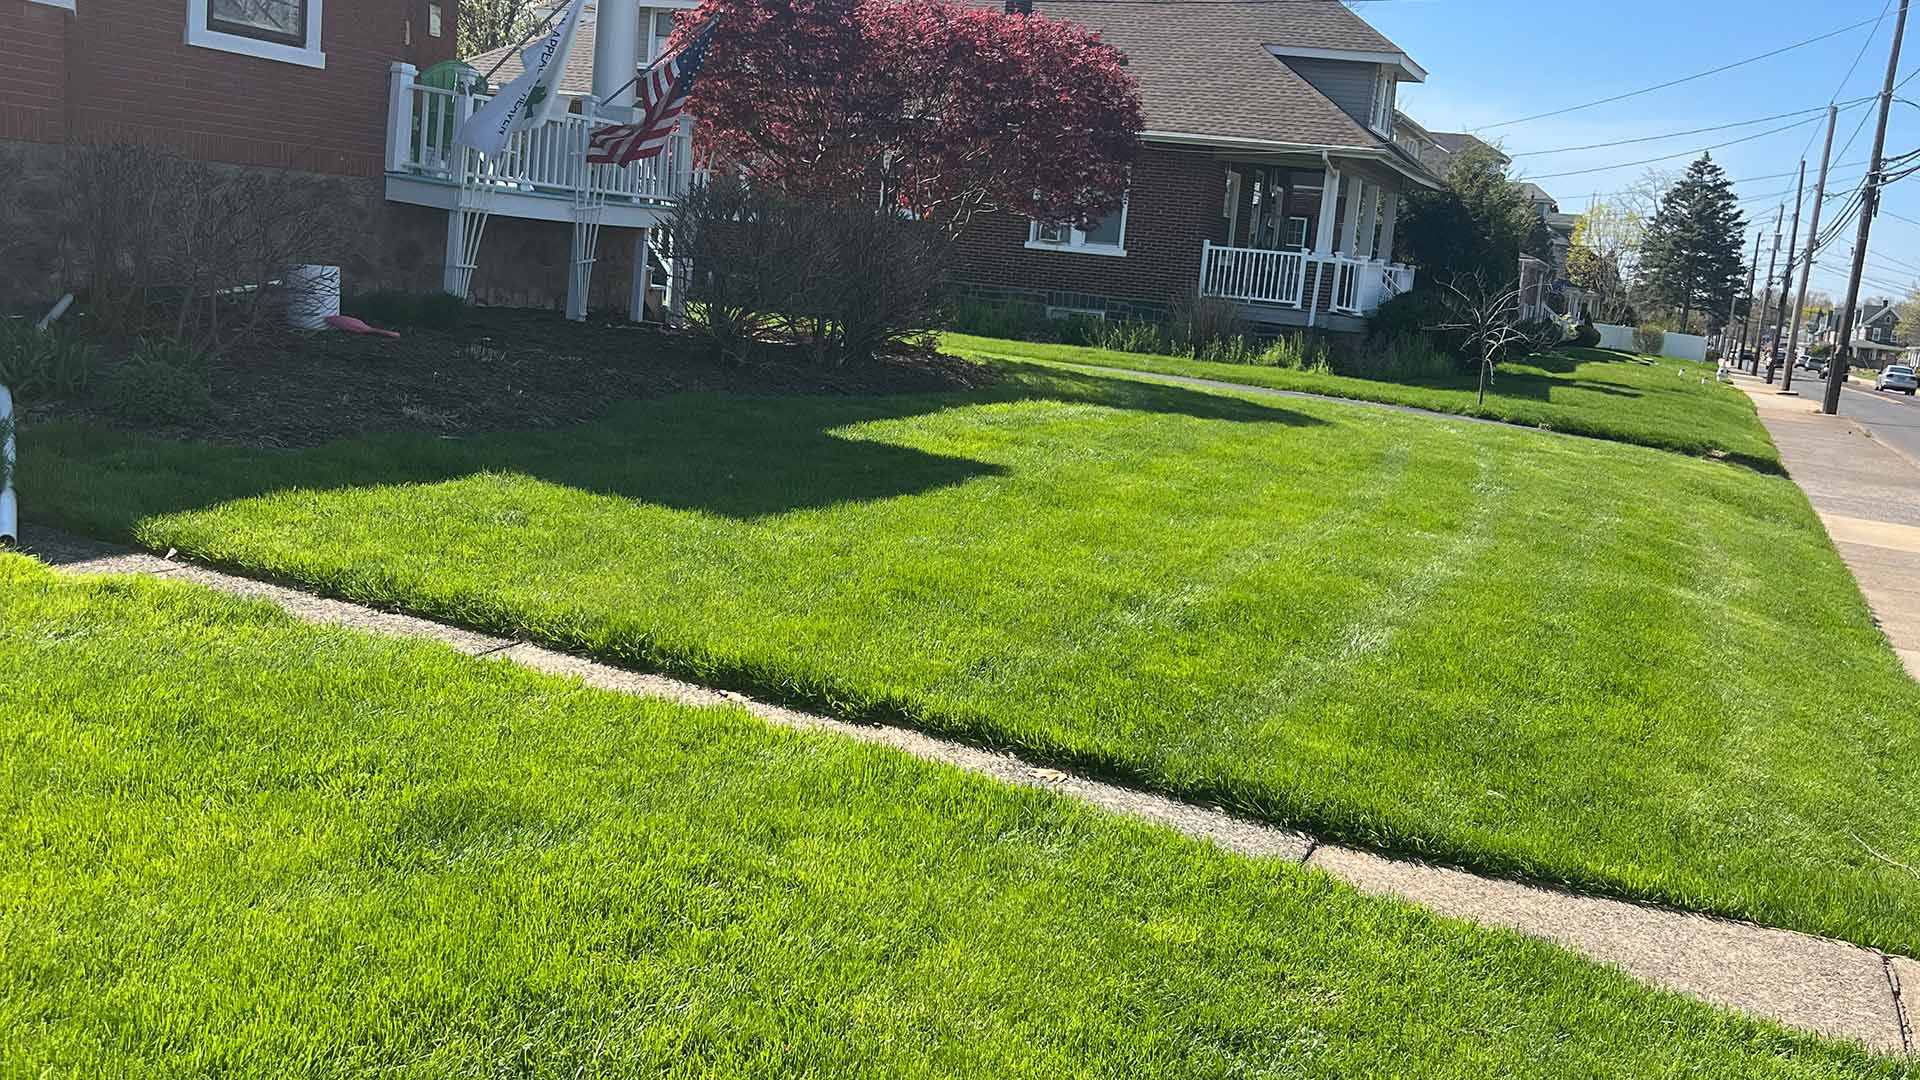 Home yard with healthy, green grass slanted towards a street in Perkasie, PA.